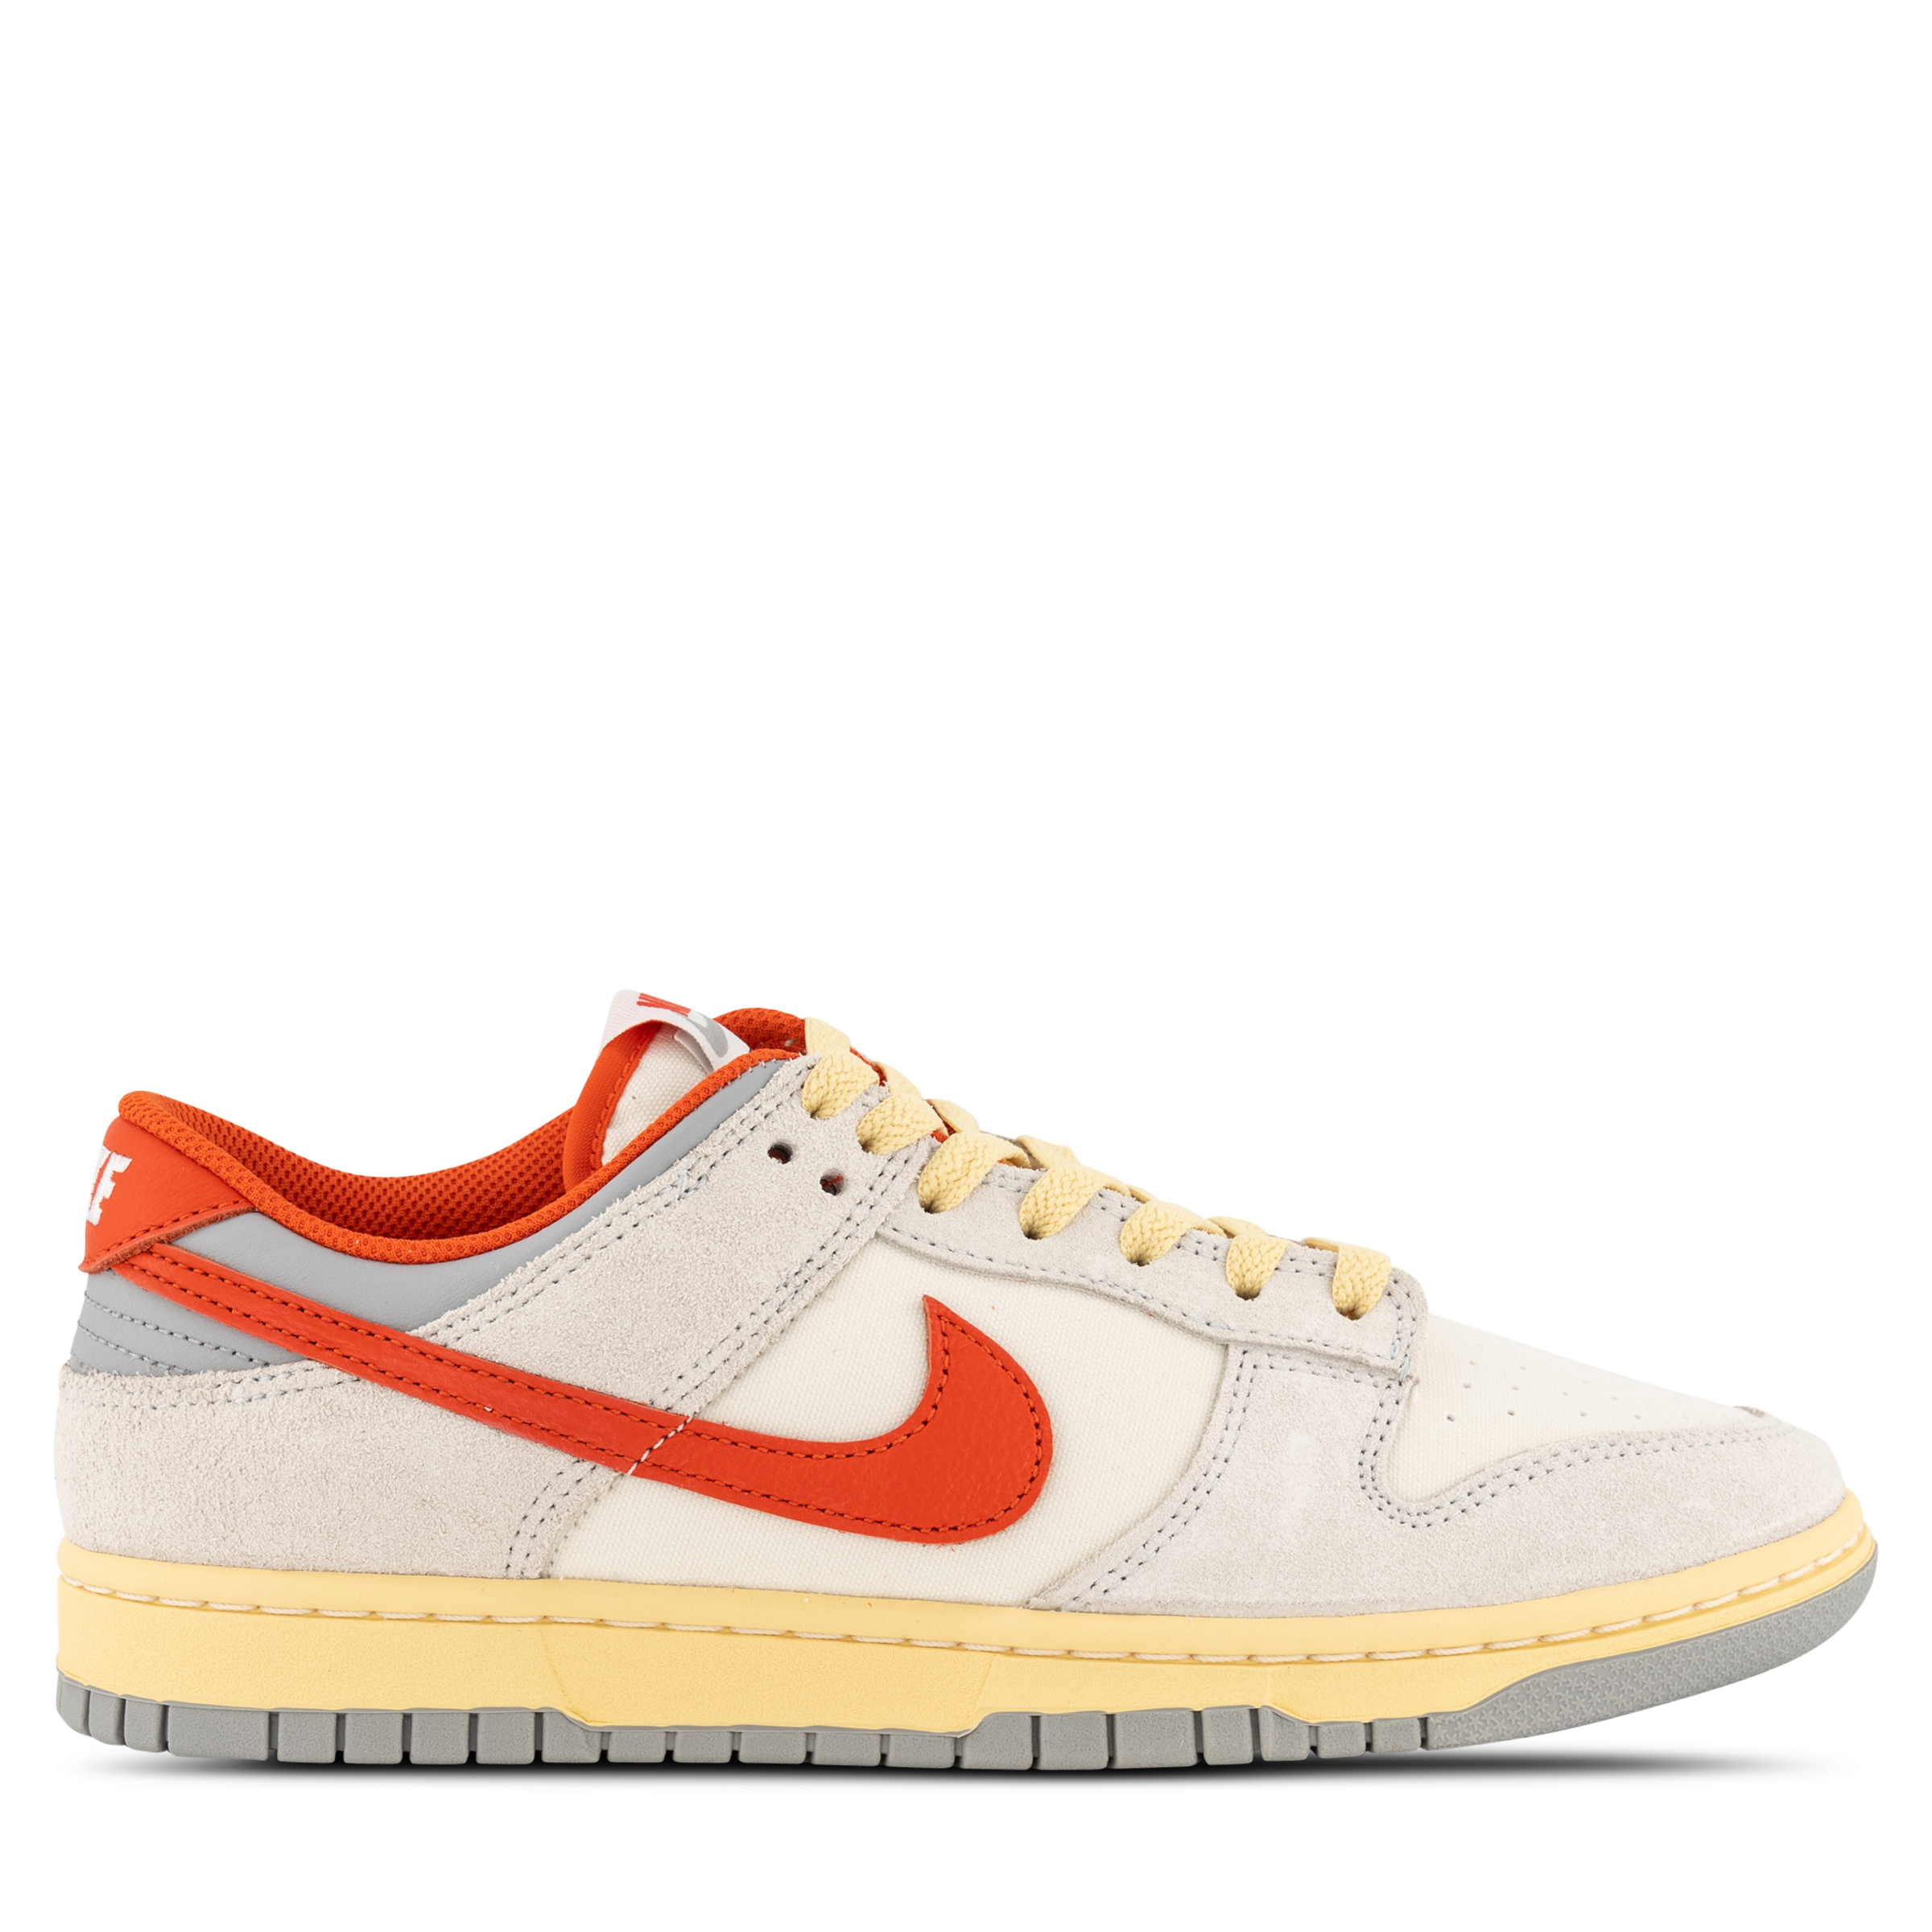 Nike Dunk Low SE "Athletic Department" Sail/Picante Red/Photon Dust